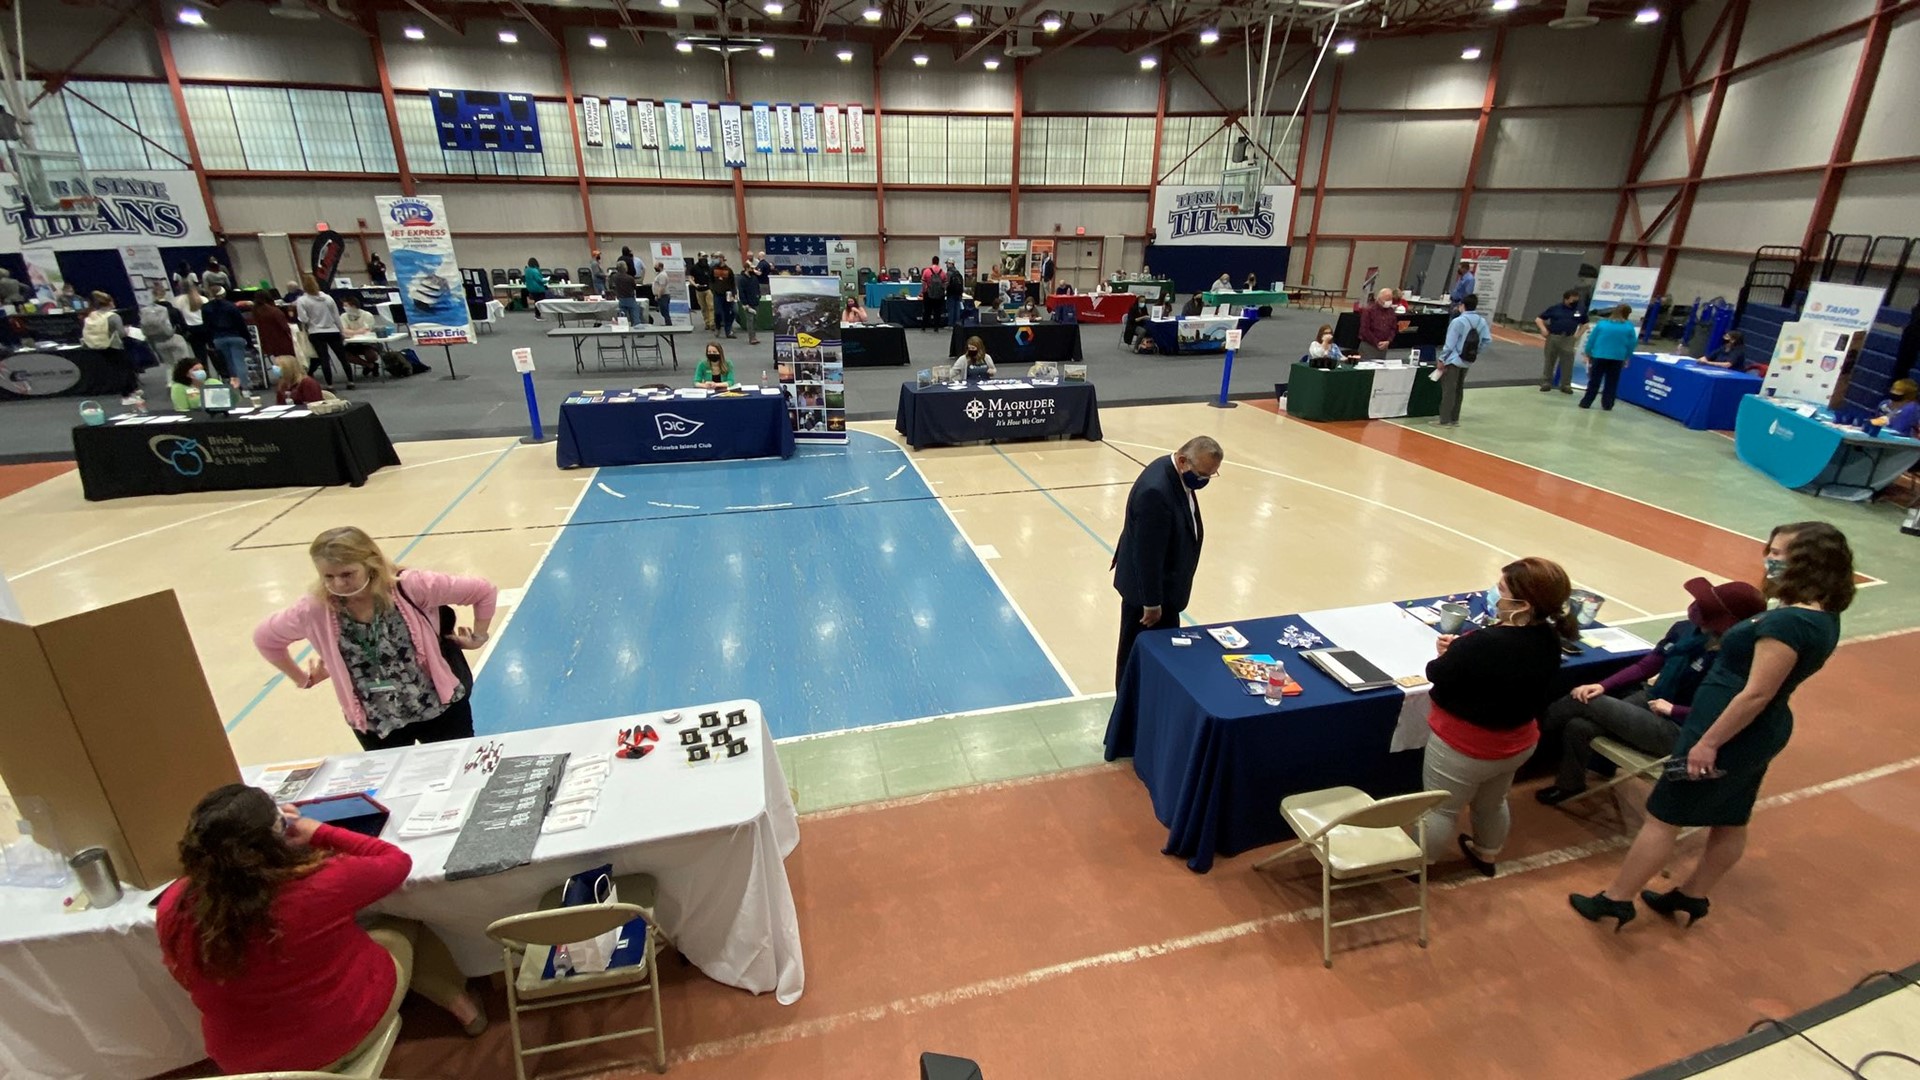 Terra State Community College hosted the in-person career fair Tuesday. While the goal is to connect students with jobs, the public was also invited.